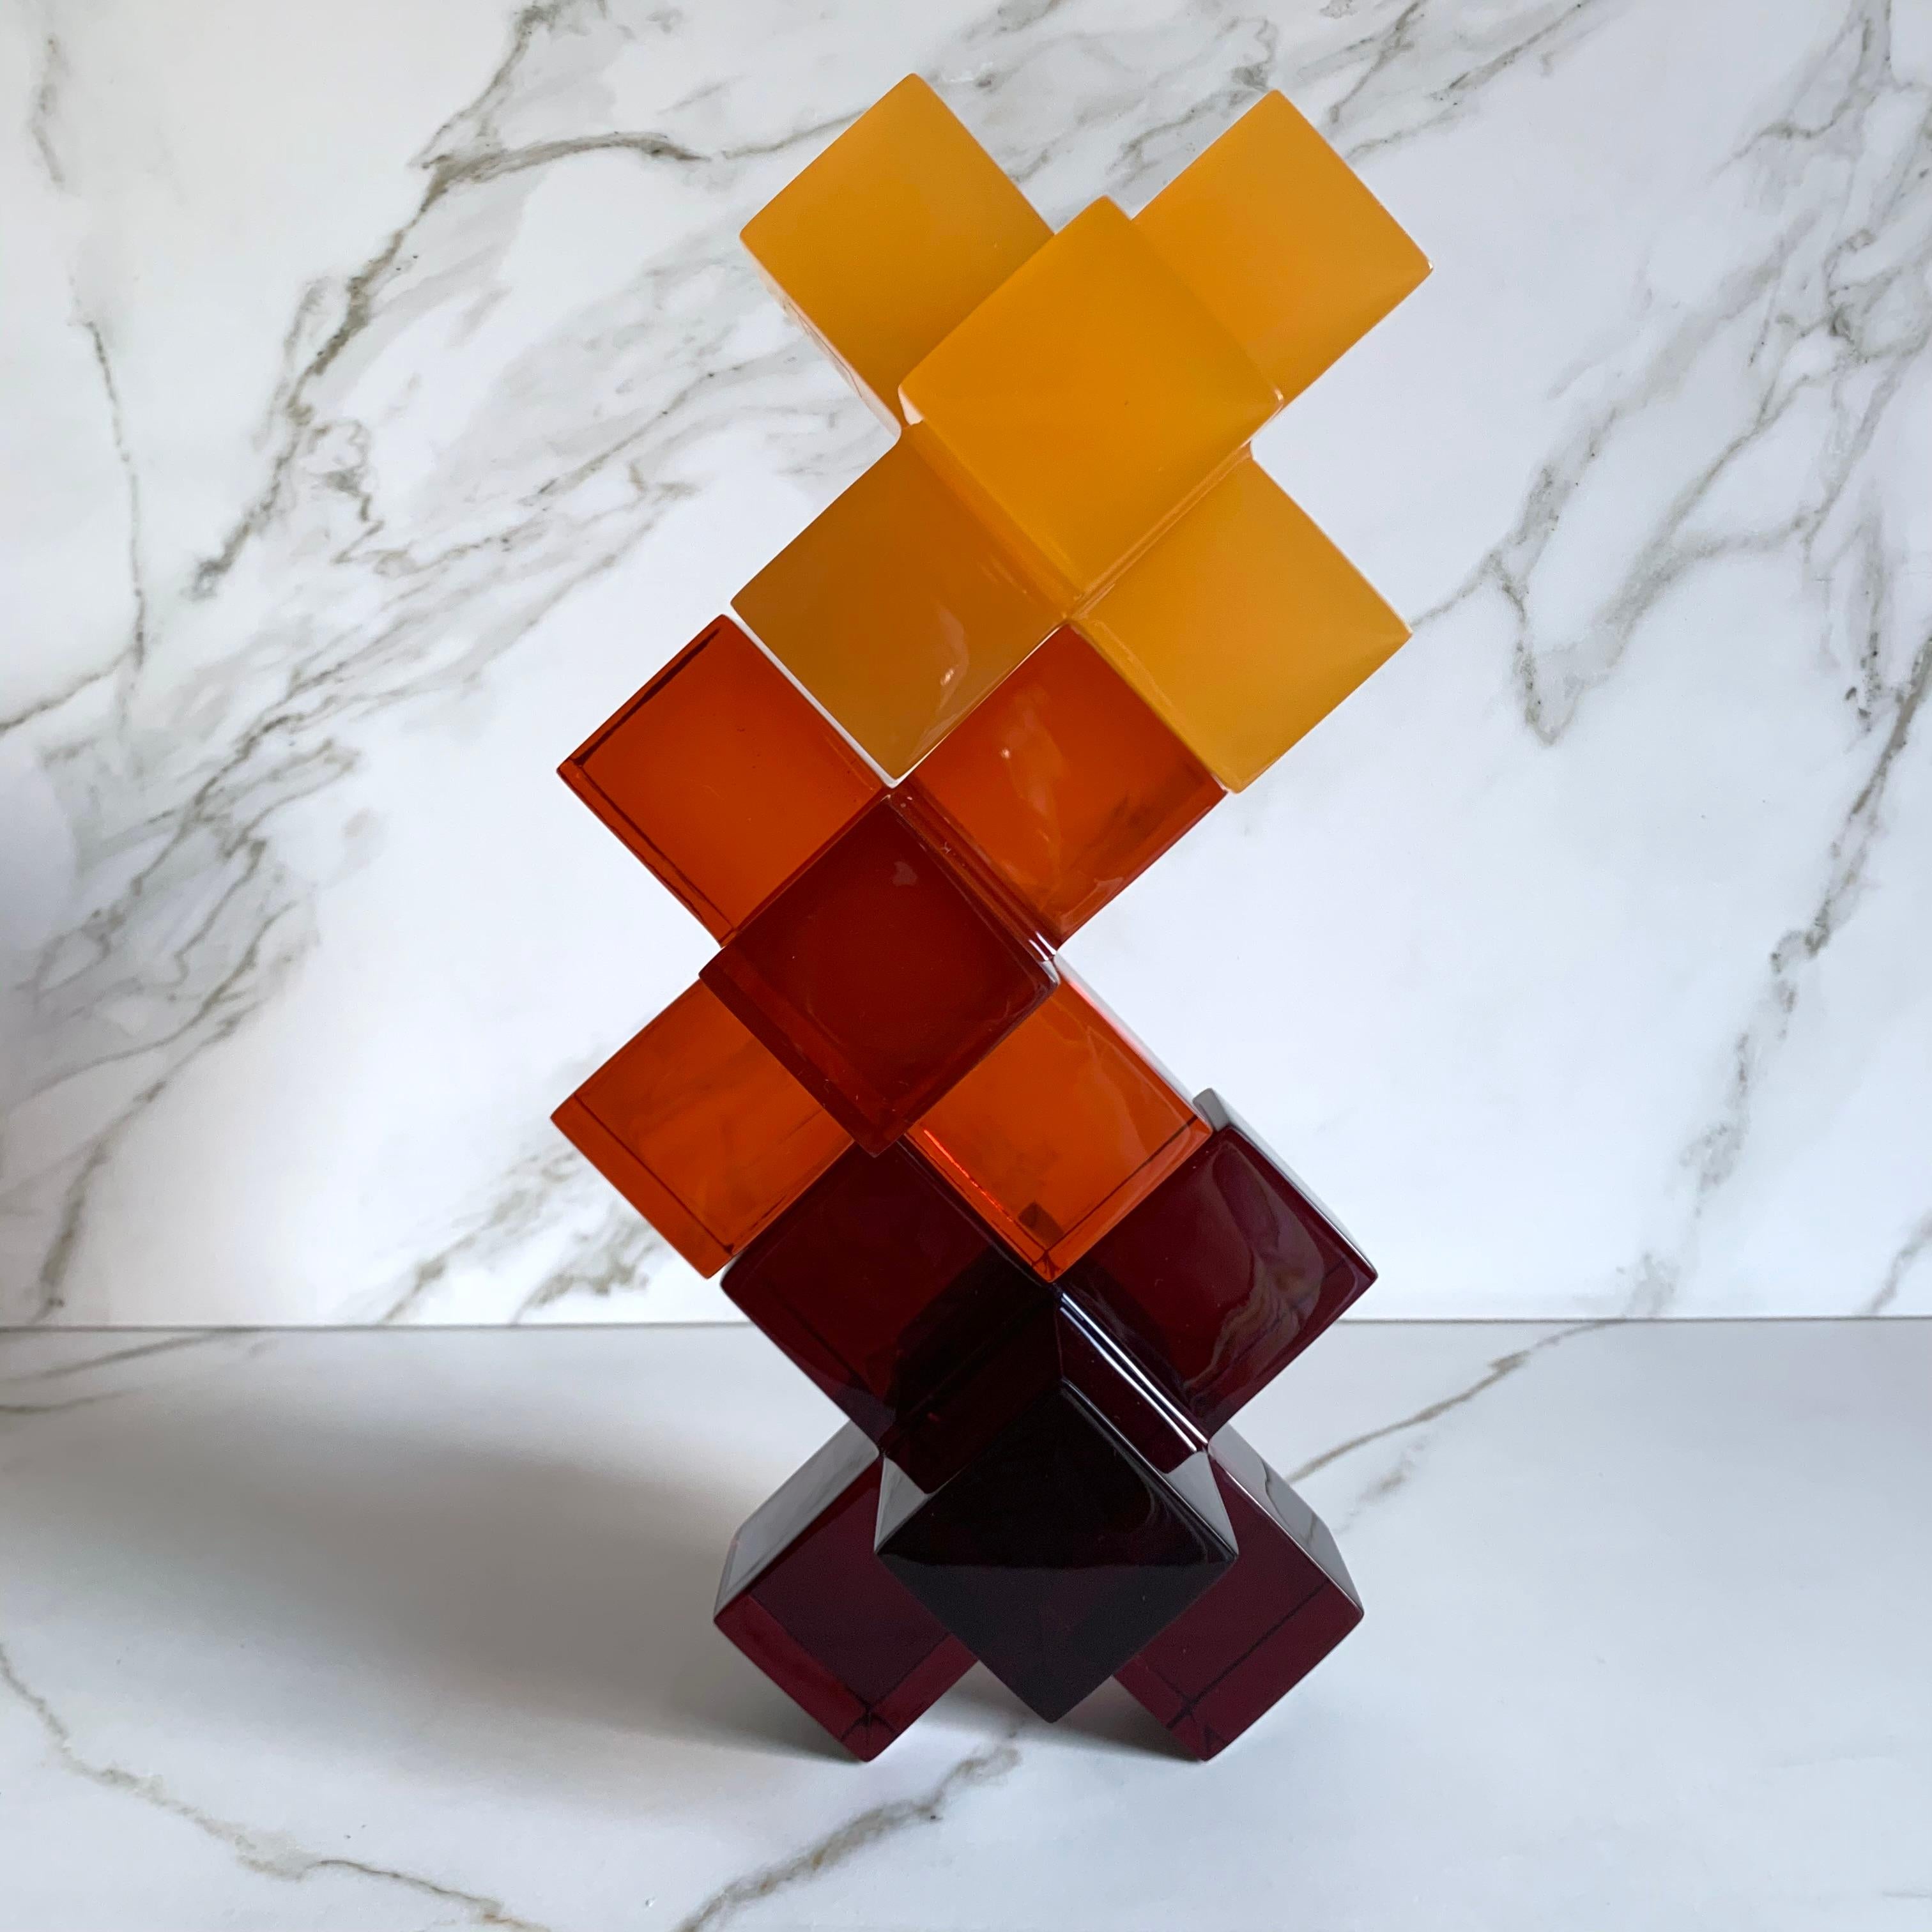 Cast Geometric Sculpture in Polished Tangerine Resin by Paola Valle For Sale